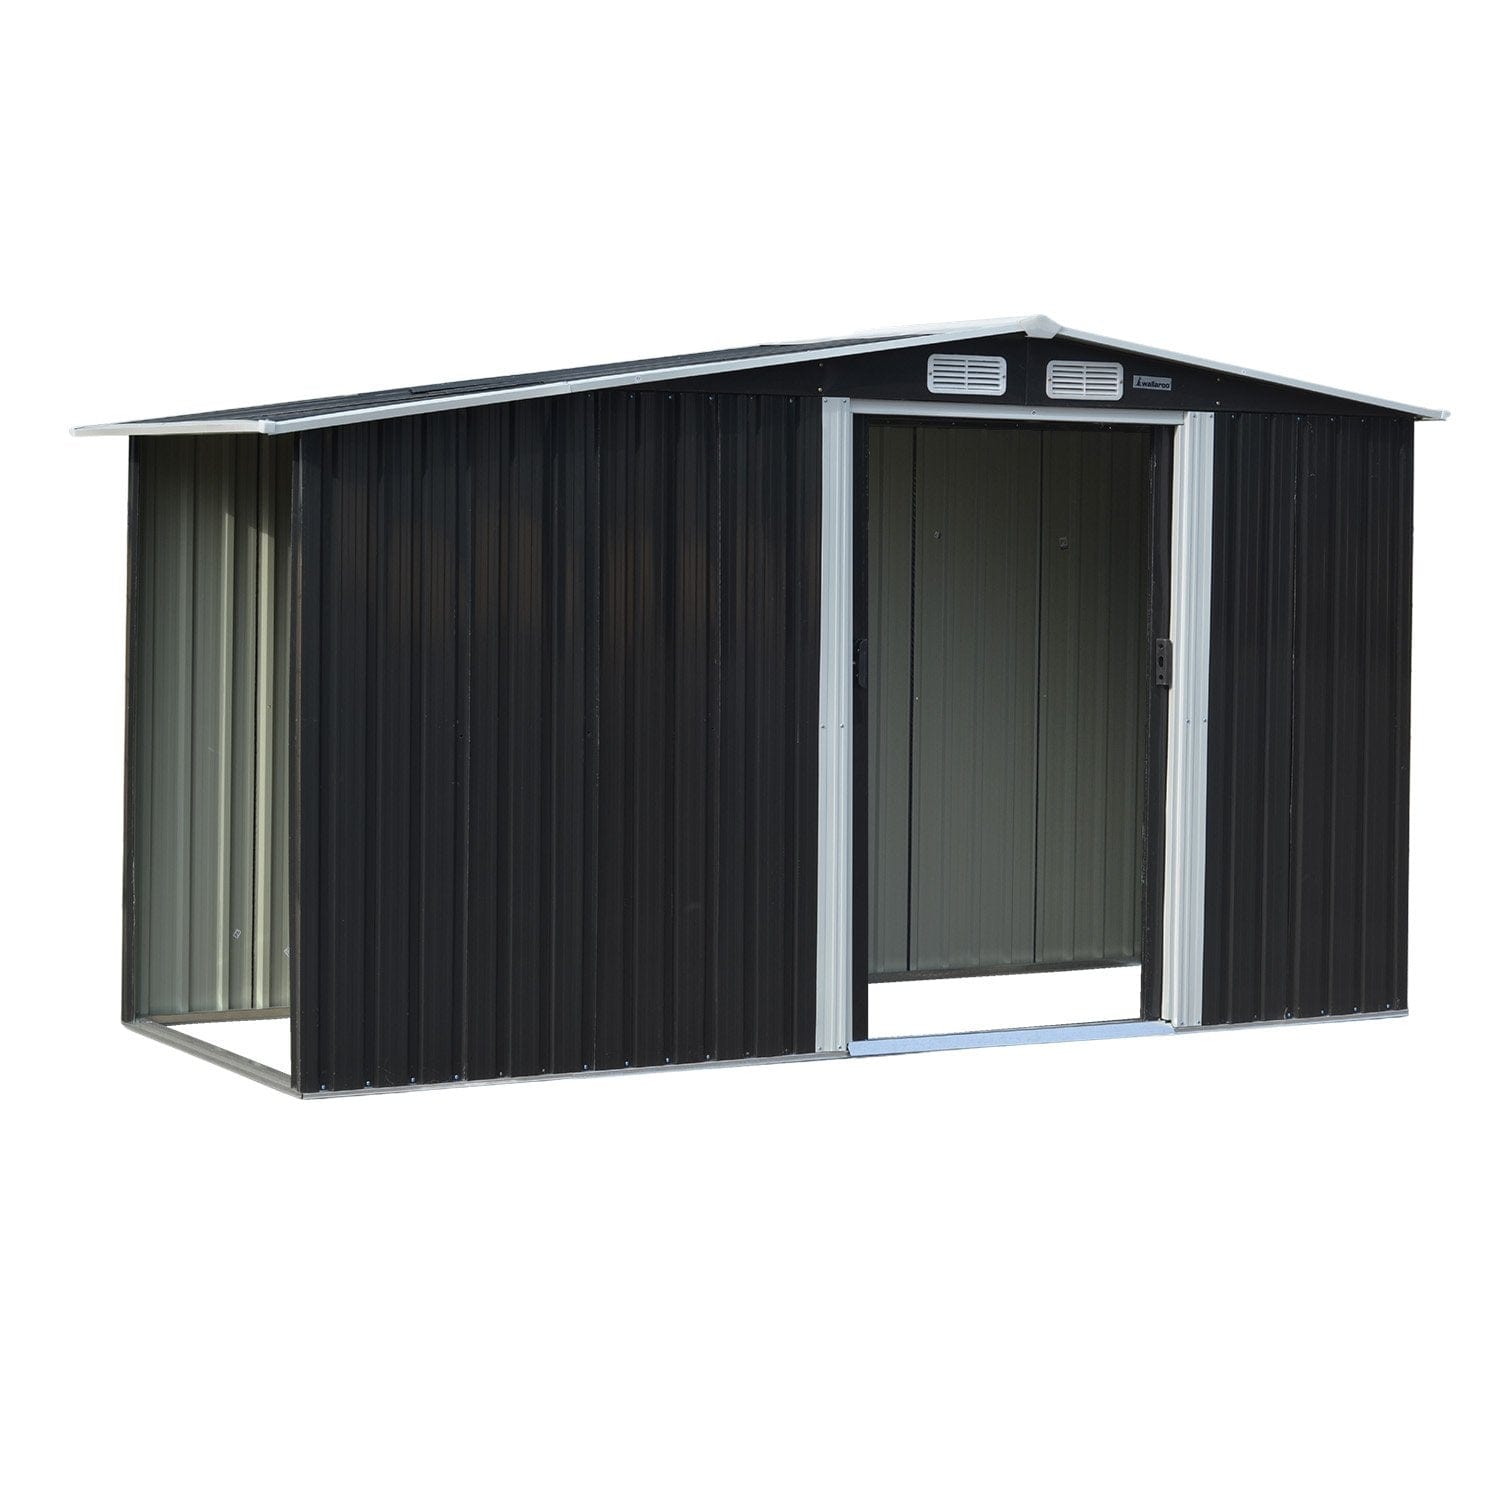 Garden Shed with Semi-Close Storage 4*8FT - Black